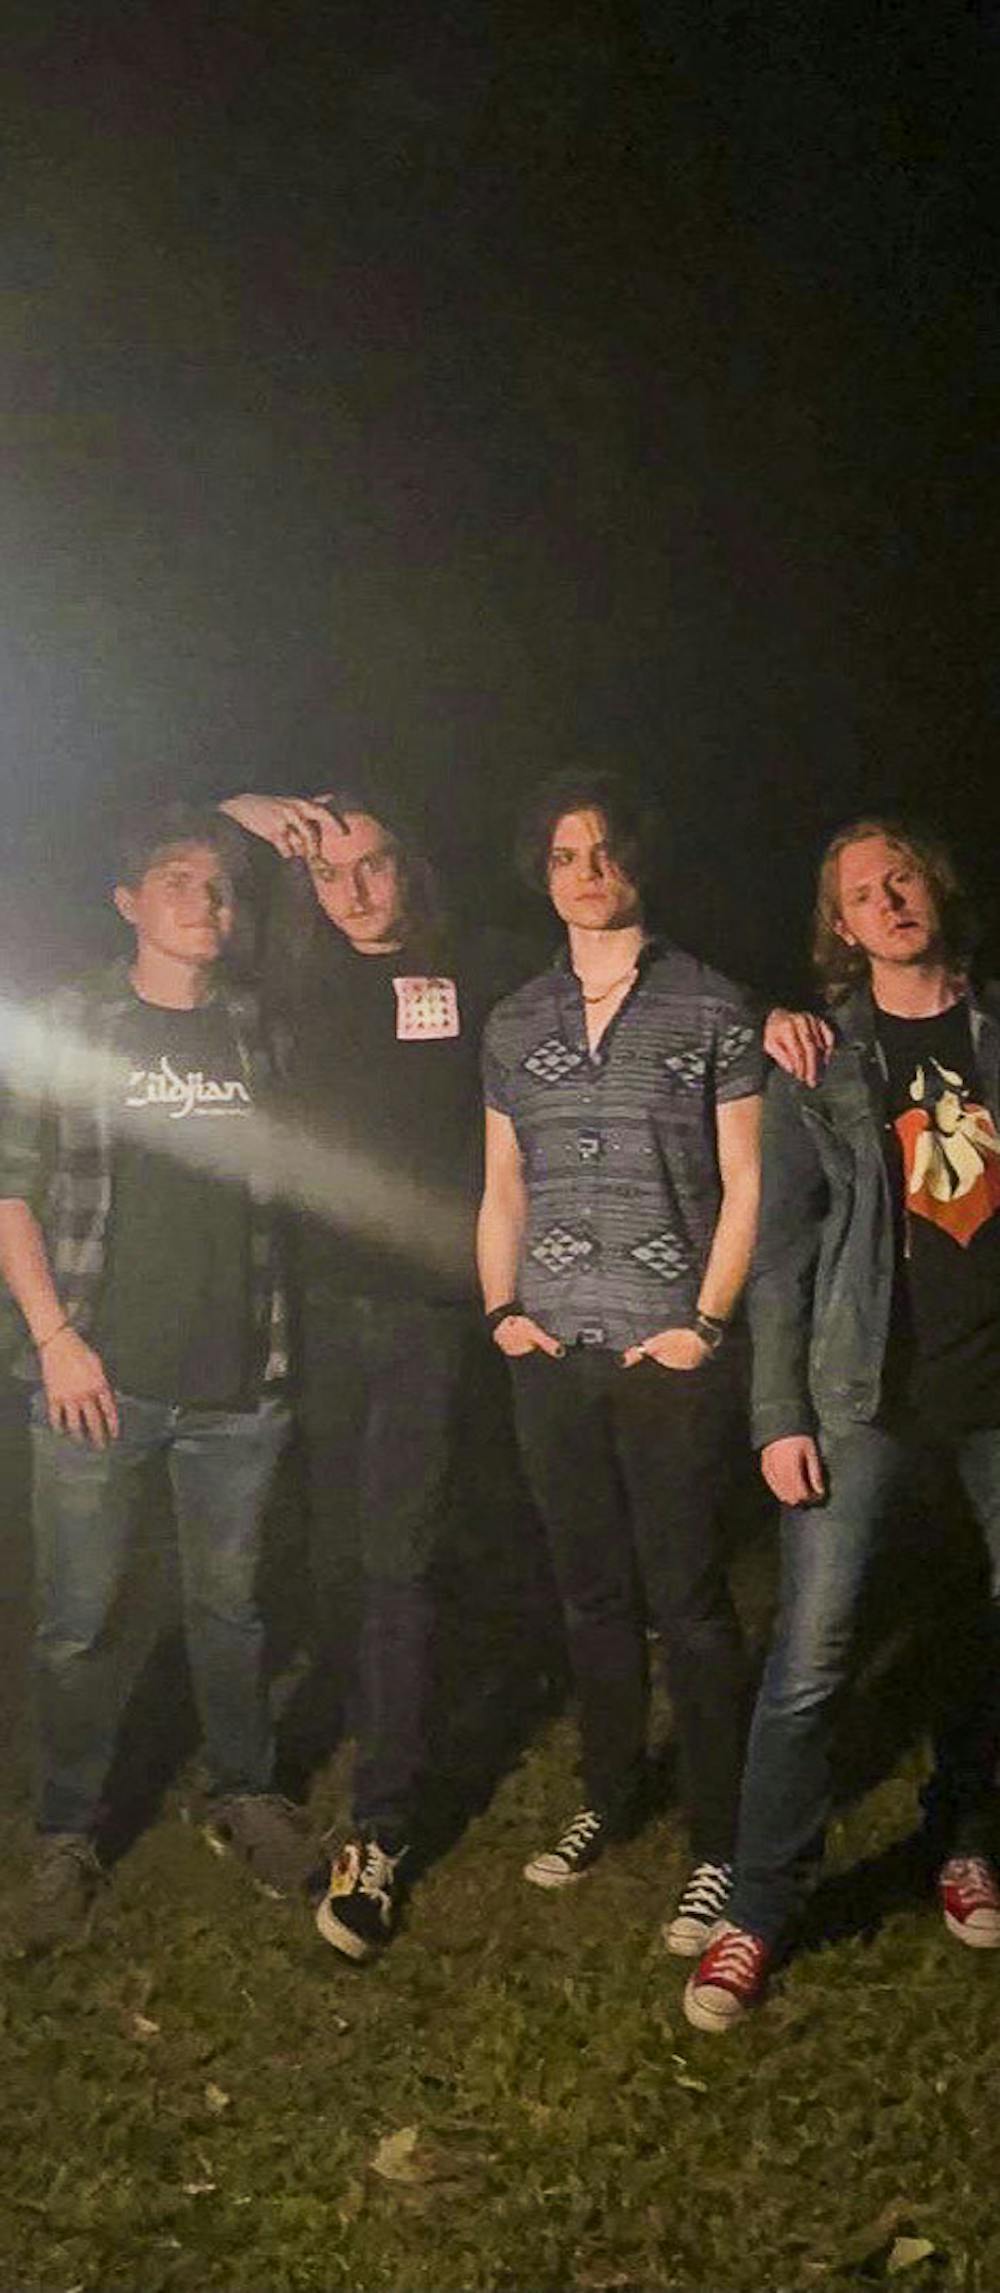 <p>Bleeding Trees members, (from left to right) drummer Blake Walker, guitarist Gavin Seboe, guitarist and vocalist Jeremy Wheeler and bassist and backup vocalist Boodrix Seboe, pose together after a house show in Sumter, SC on Jan. 1, 2023. The Columbia-based alternative grunge emo band said it likes to bring theatrics and emotion in their songs and performances.&nbsp;</p>